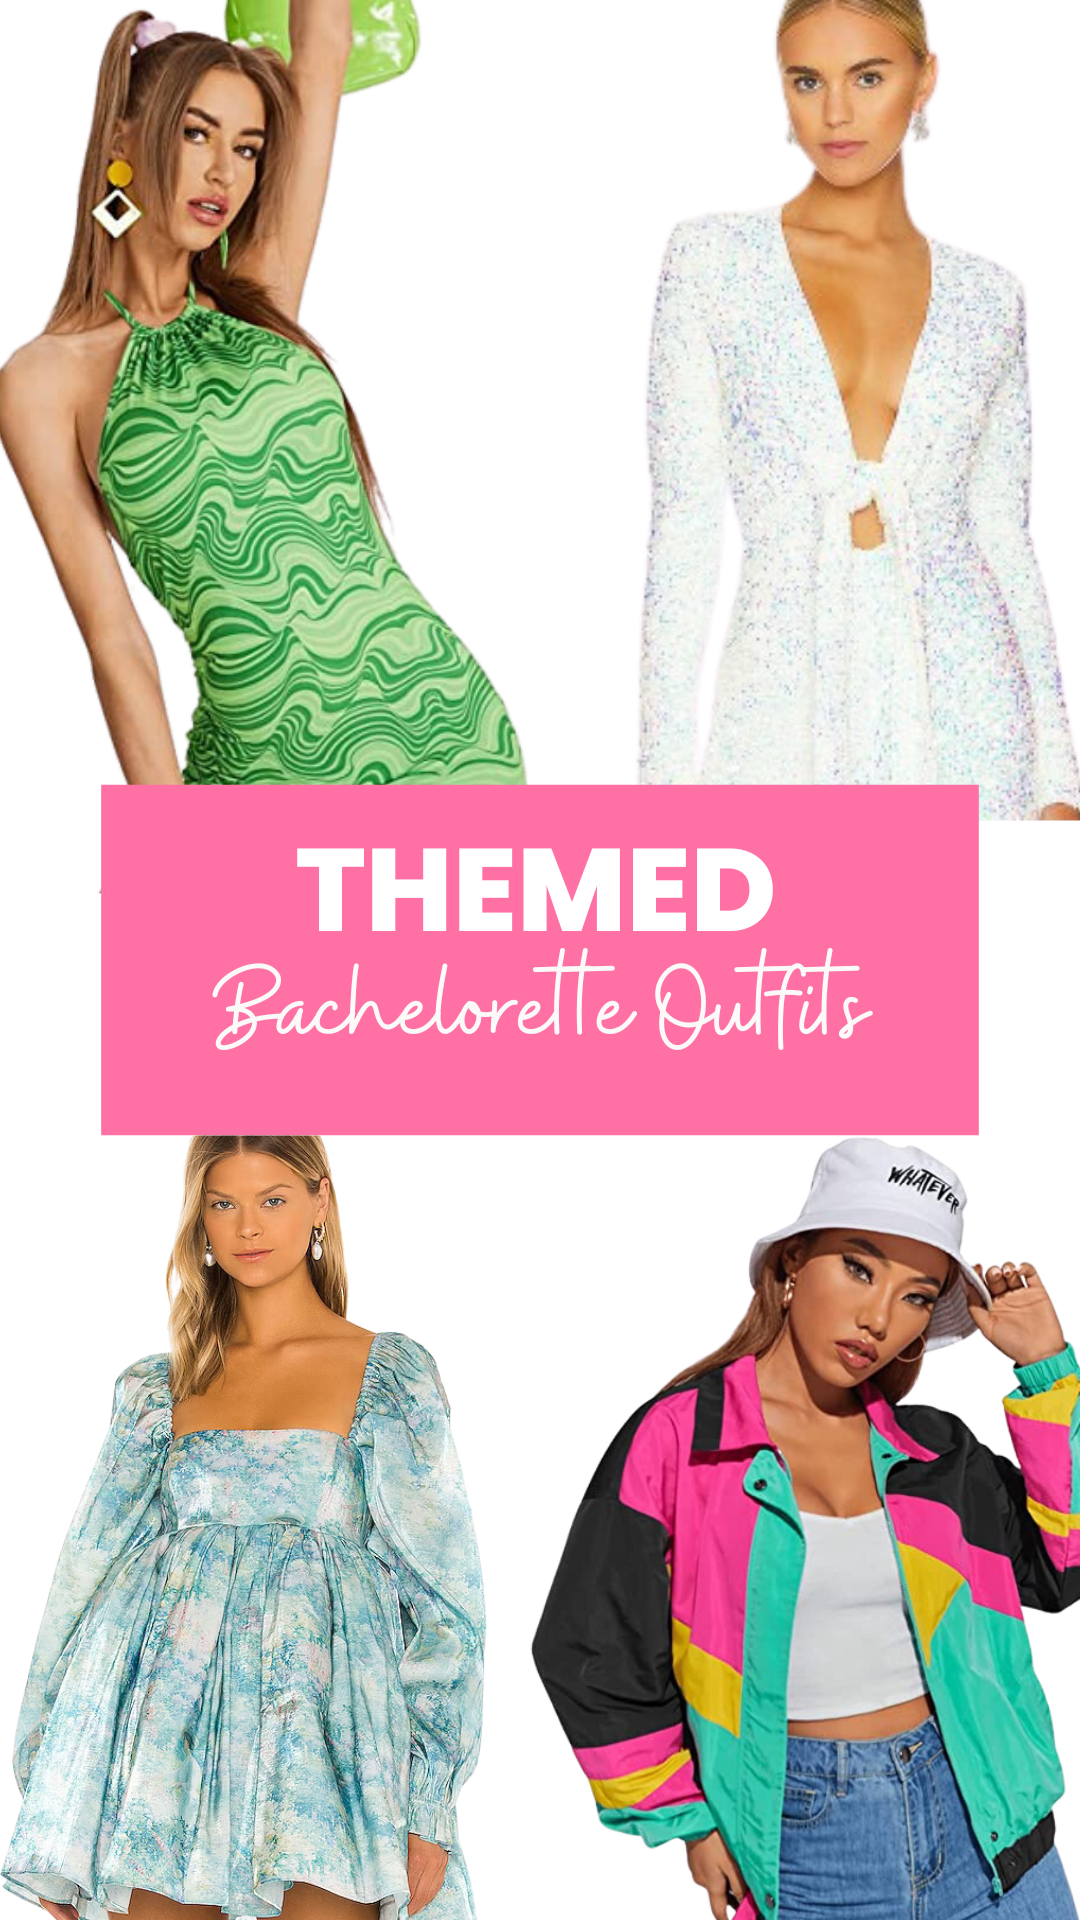 The Best Bachelorette Outfits by Theme